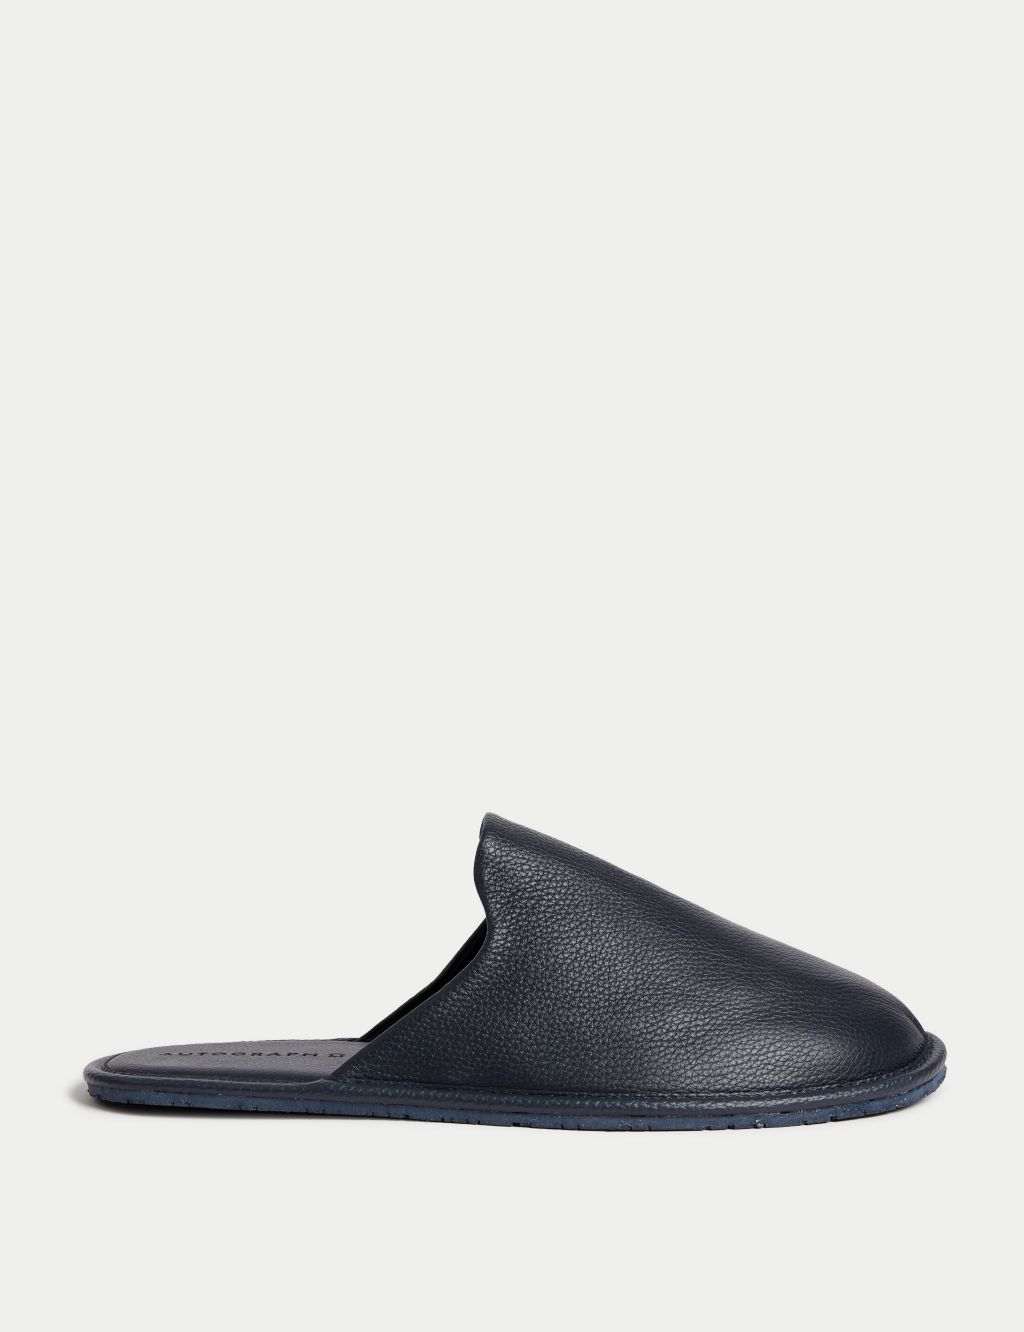 Leather Mule Slippers with Freshfeet™ image 1